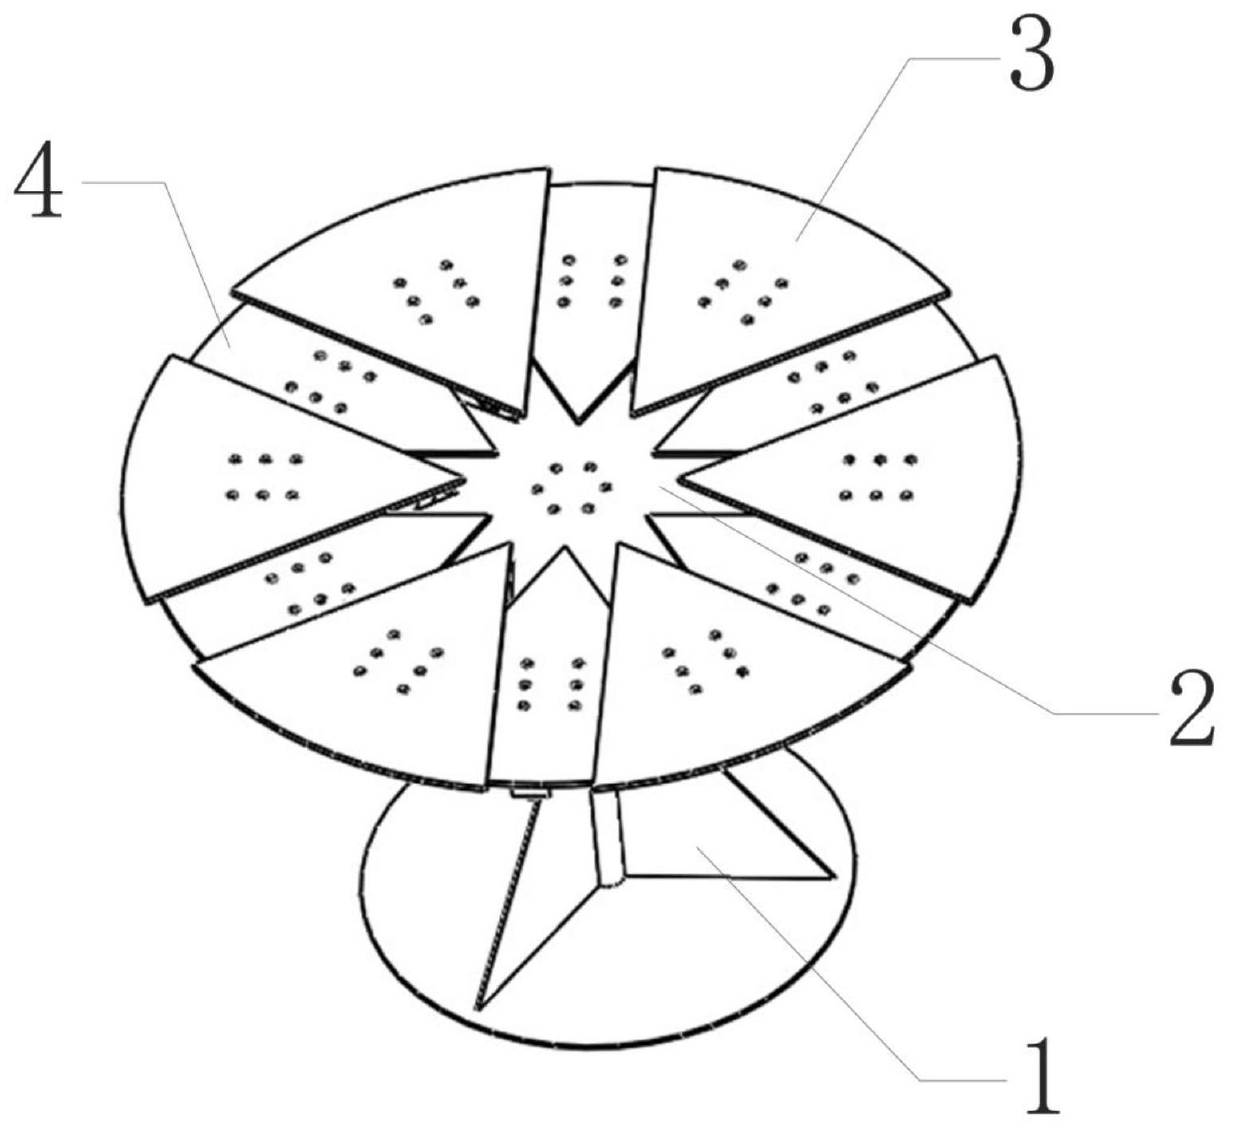 Novel extensible type round table driven by mechanical mechanism